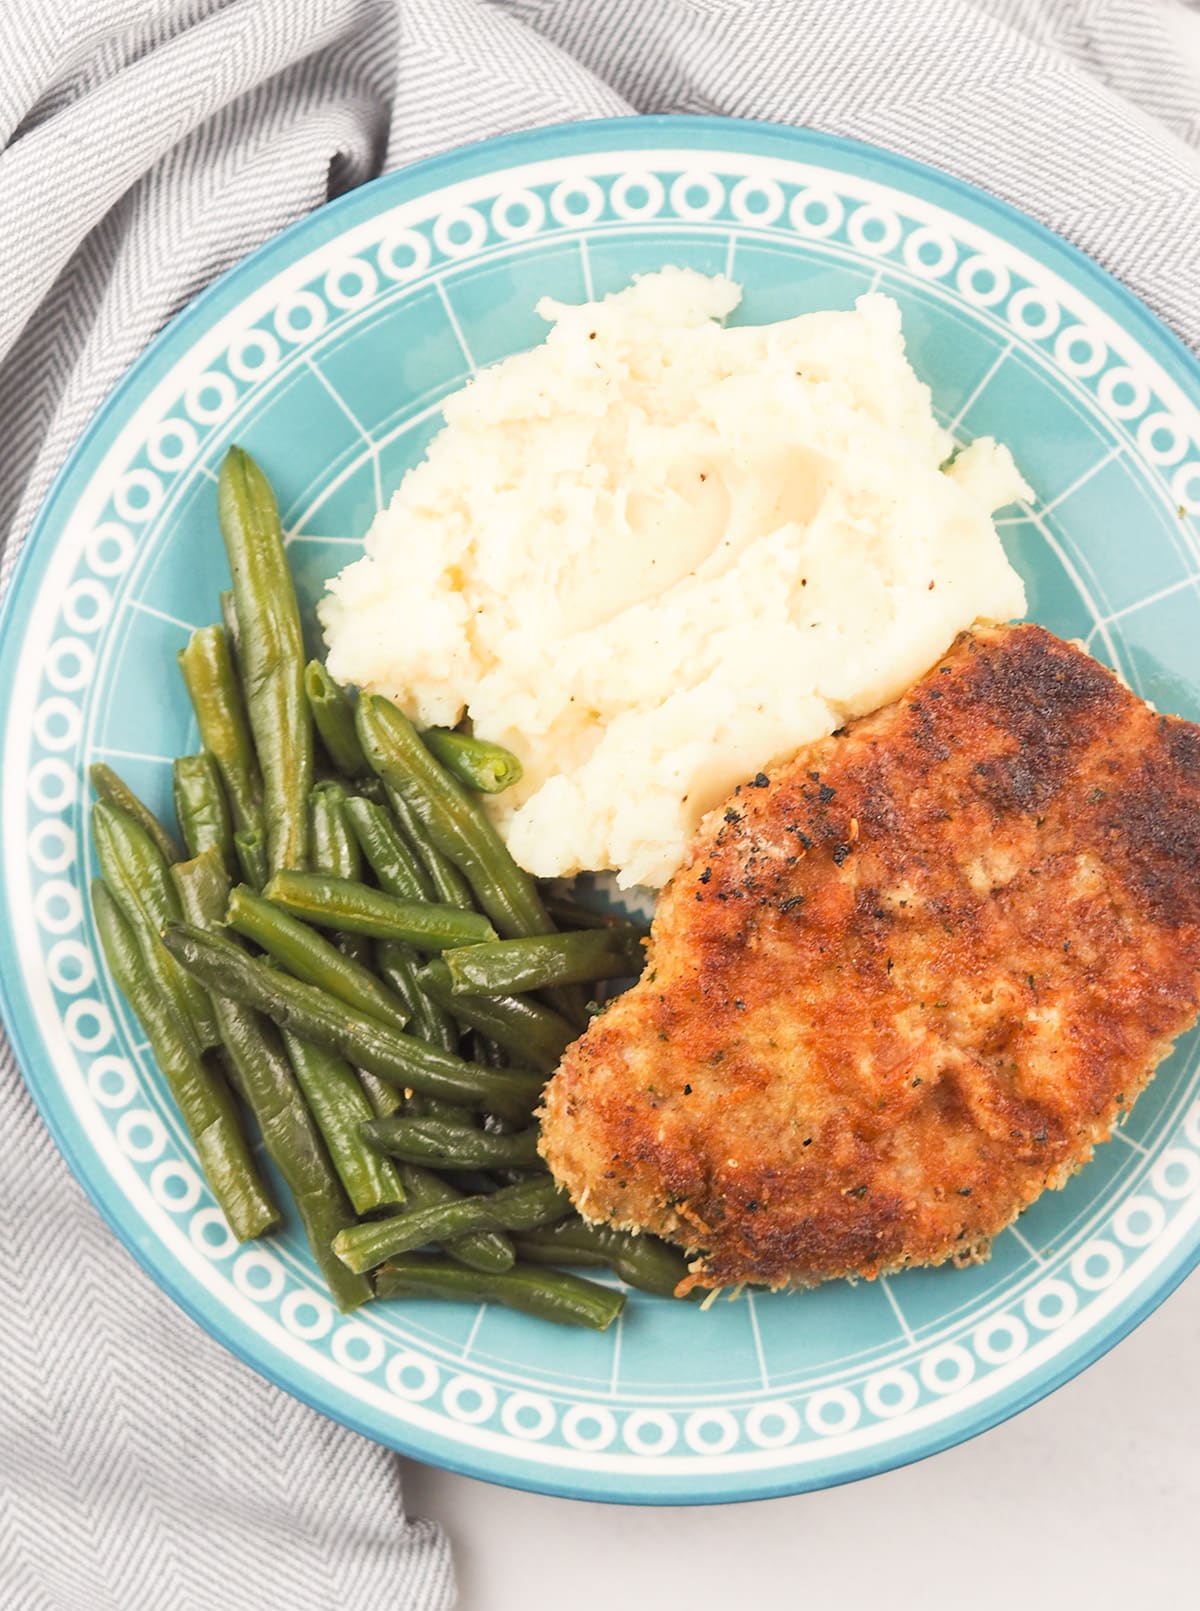 breaded pork chop on blue plate with green beans and mashed potatoes